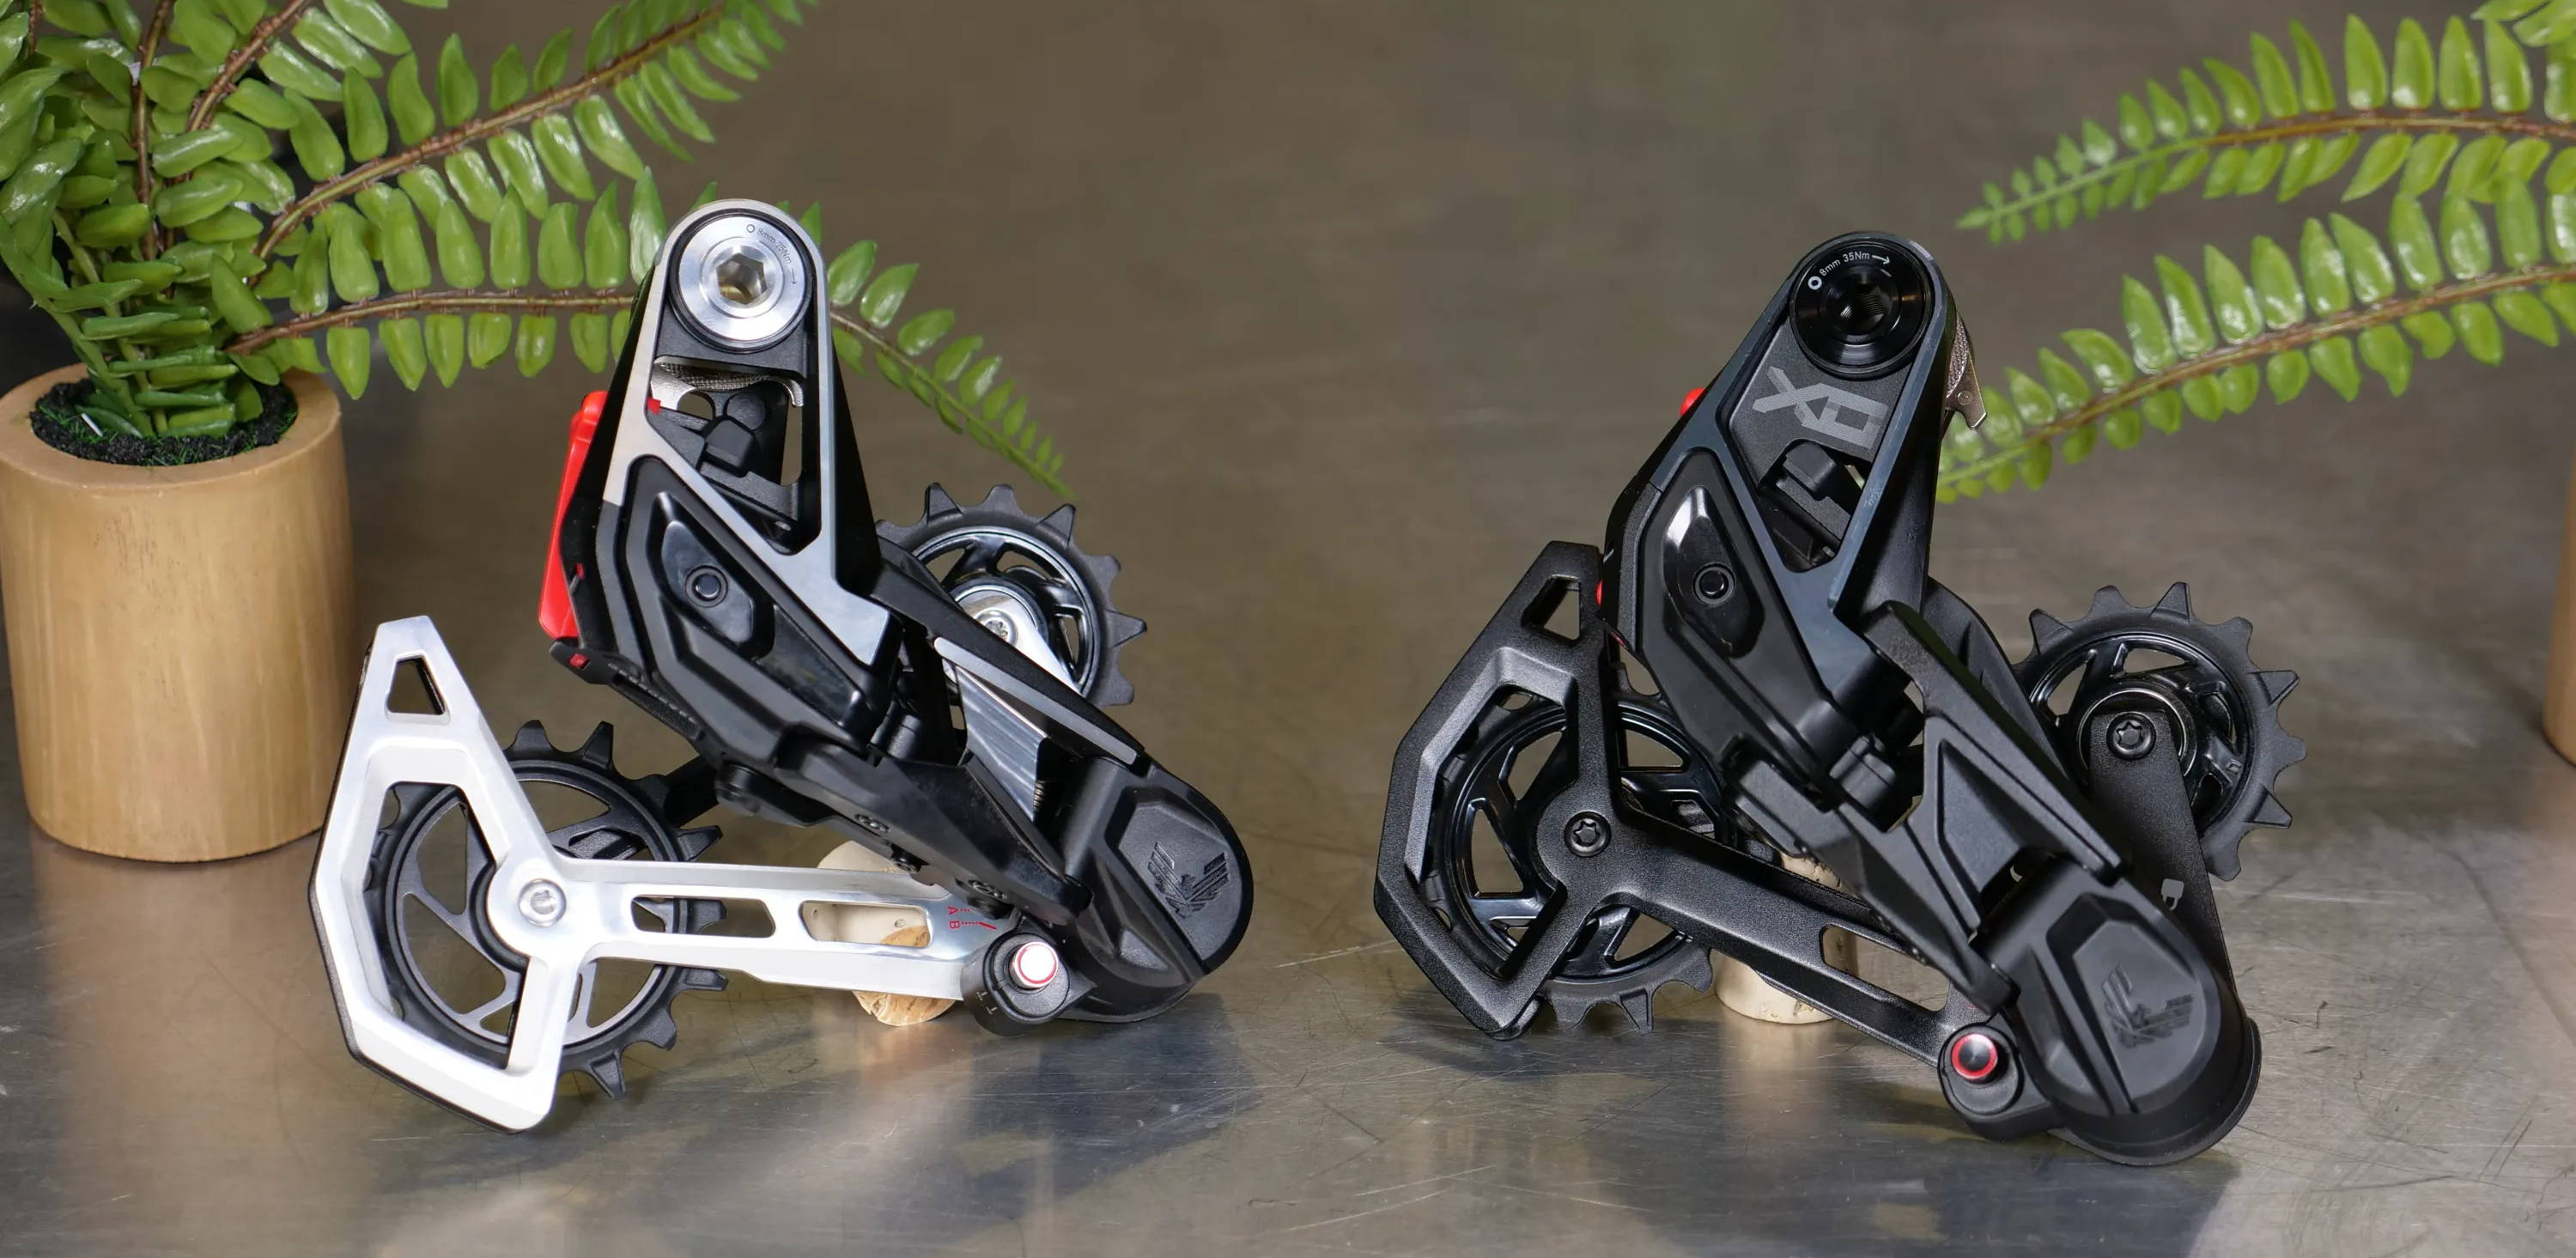 sram x0 and xx eagle t-type transmission mountain bike derailleurs on a table